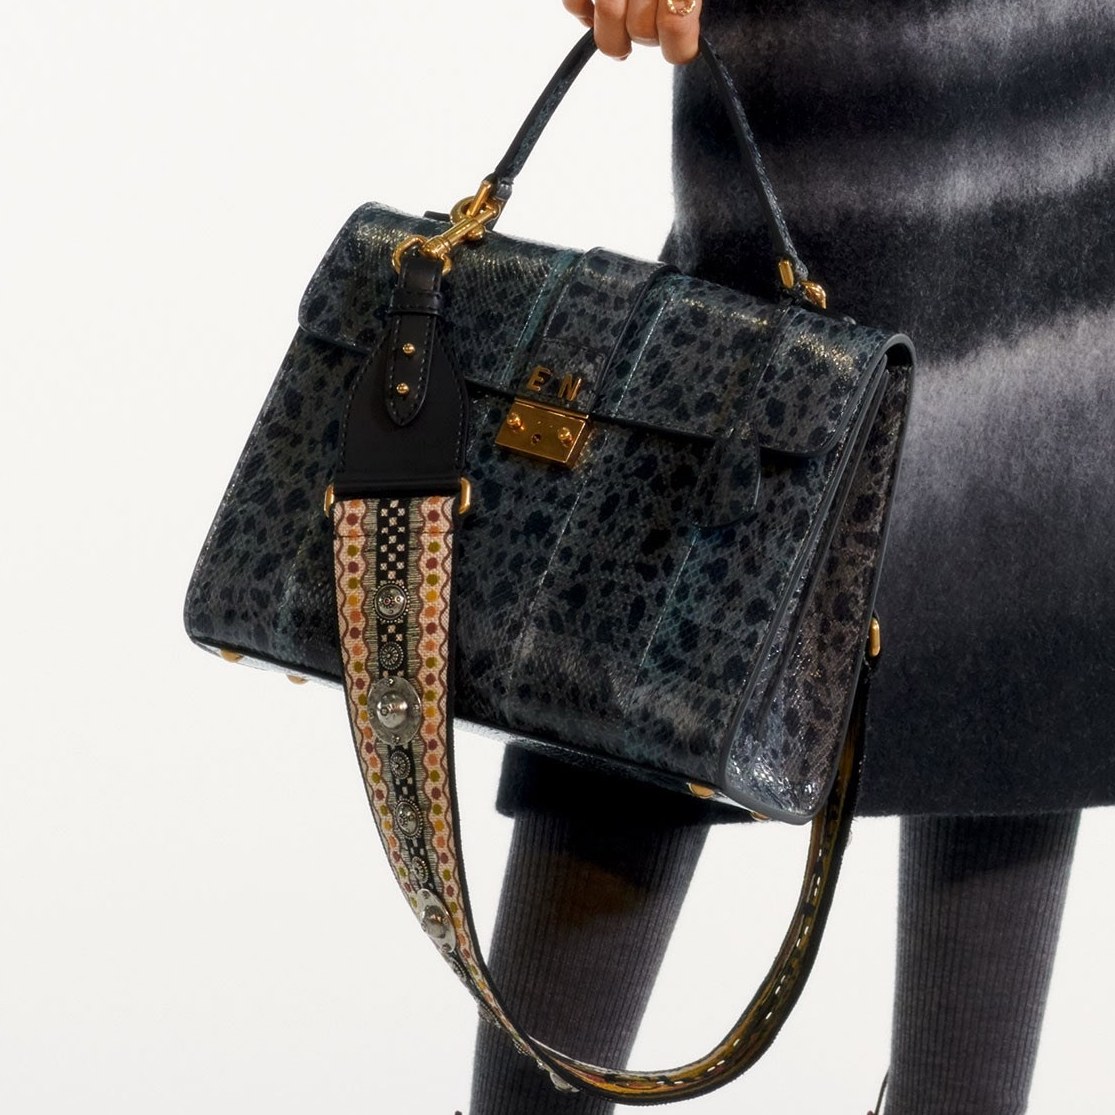 Dior Pre-Fall 2019 Bag Collection Features Snakeskin Flap Bags | Spotted Fashion